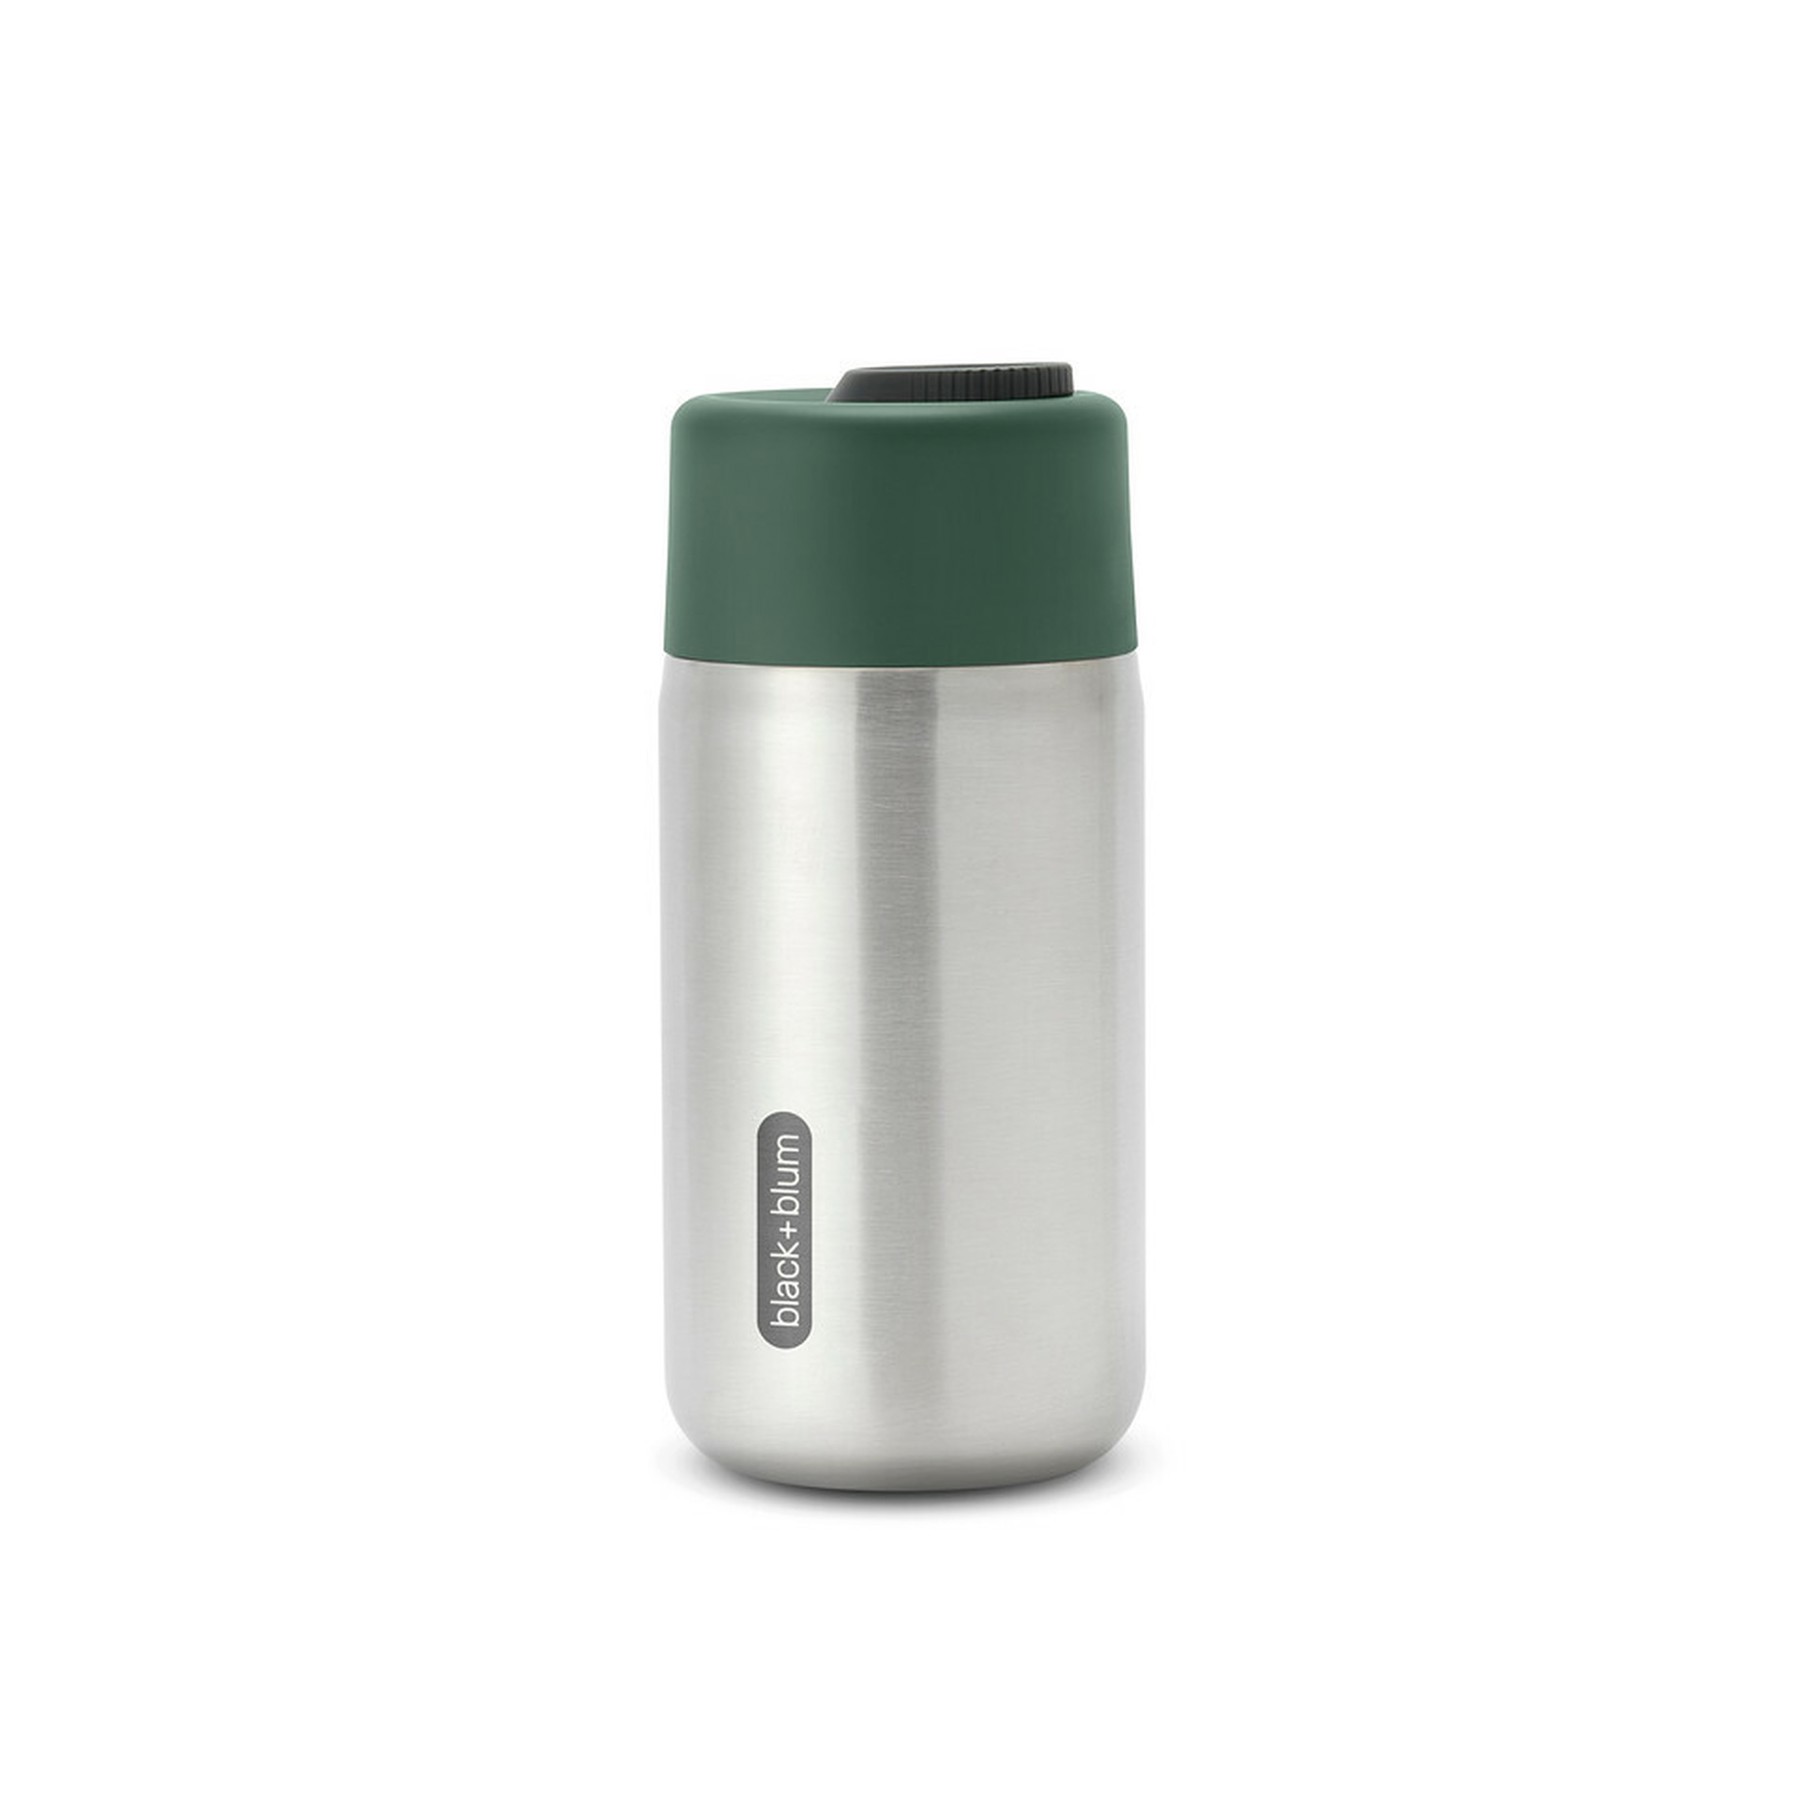 A metal insulated travel cup with a green top